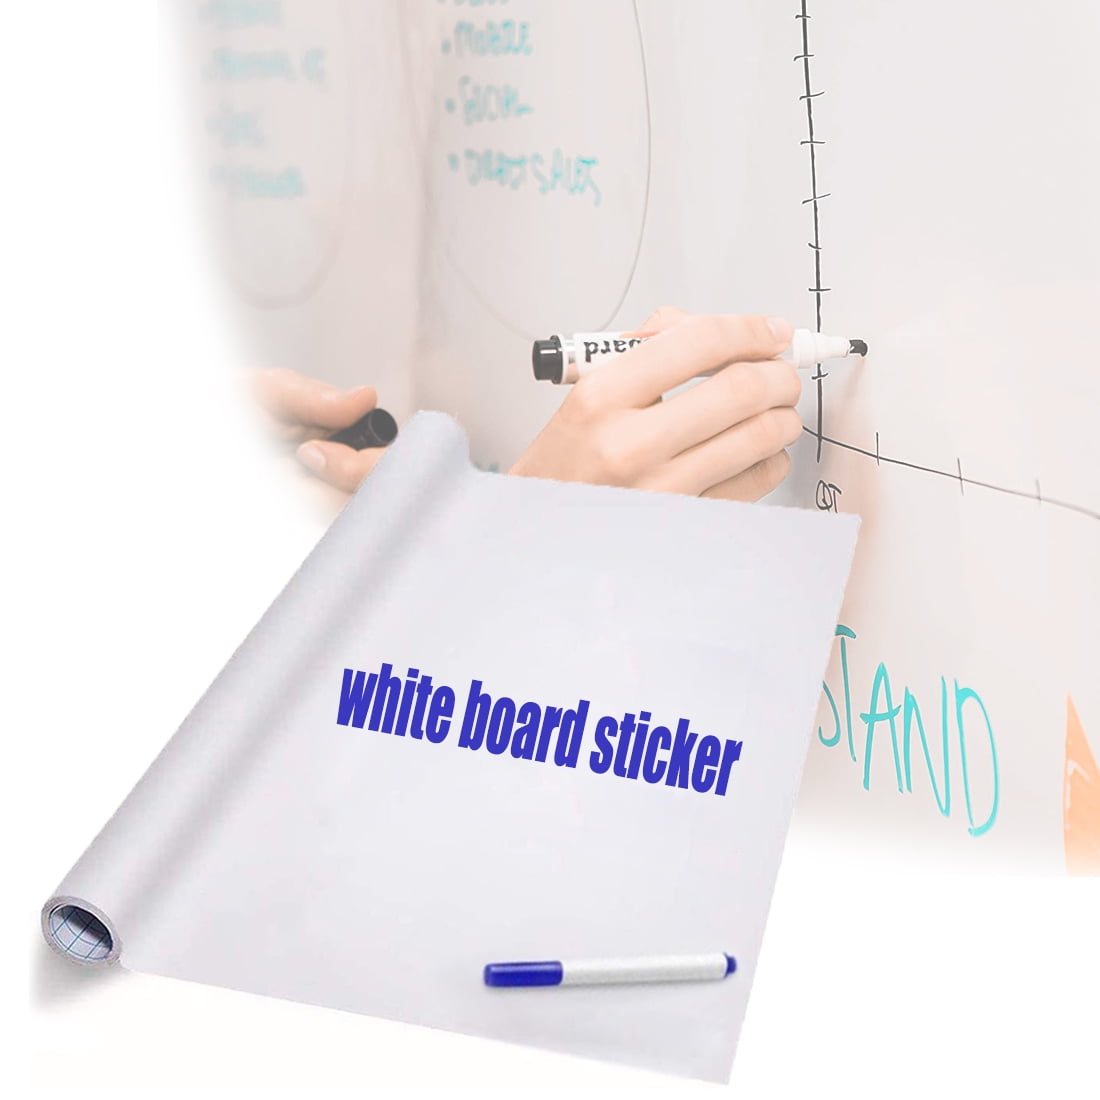 AYUQI Dry Erase Whiteboard Sticker Wall Decal, 23.6 X 78.7(6.5 ft)  Self-Adhesive White Board Peel Stick Paper to Do List with Water Pen for  Home